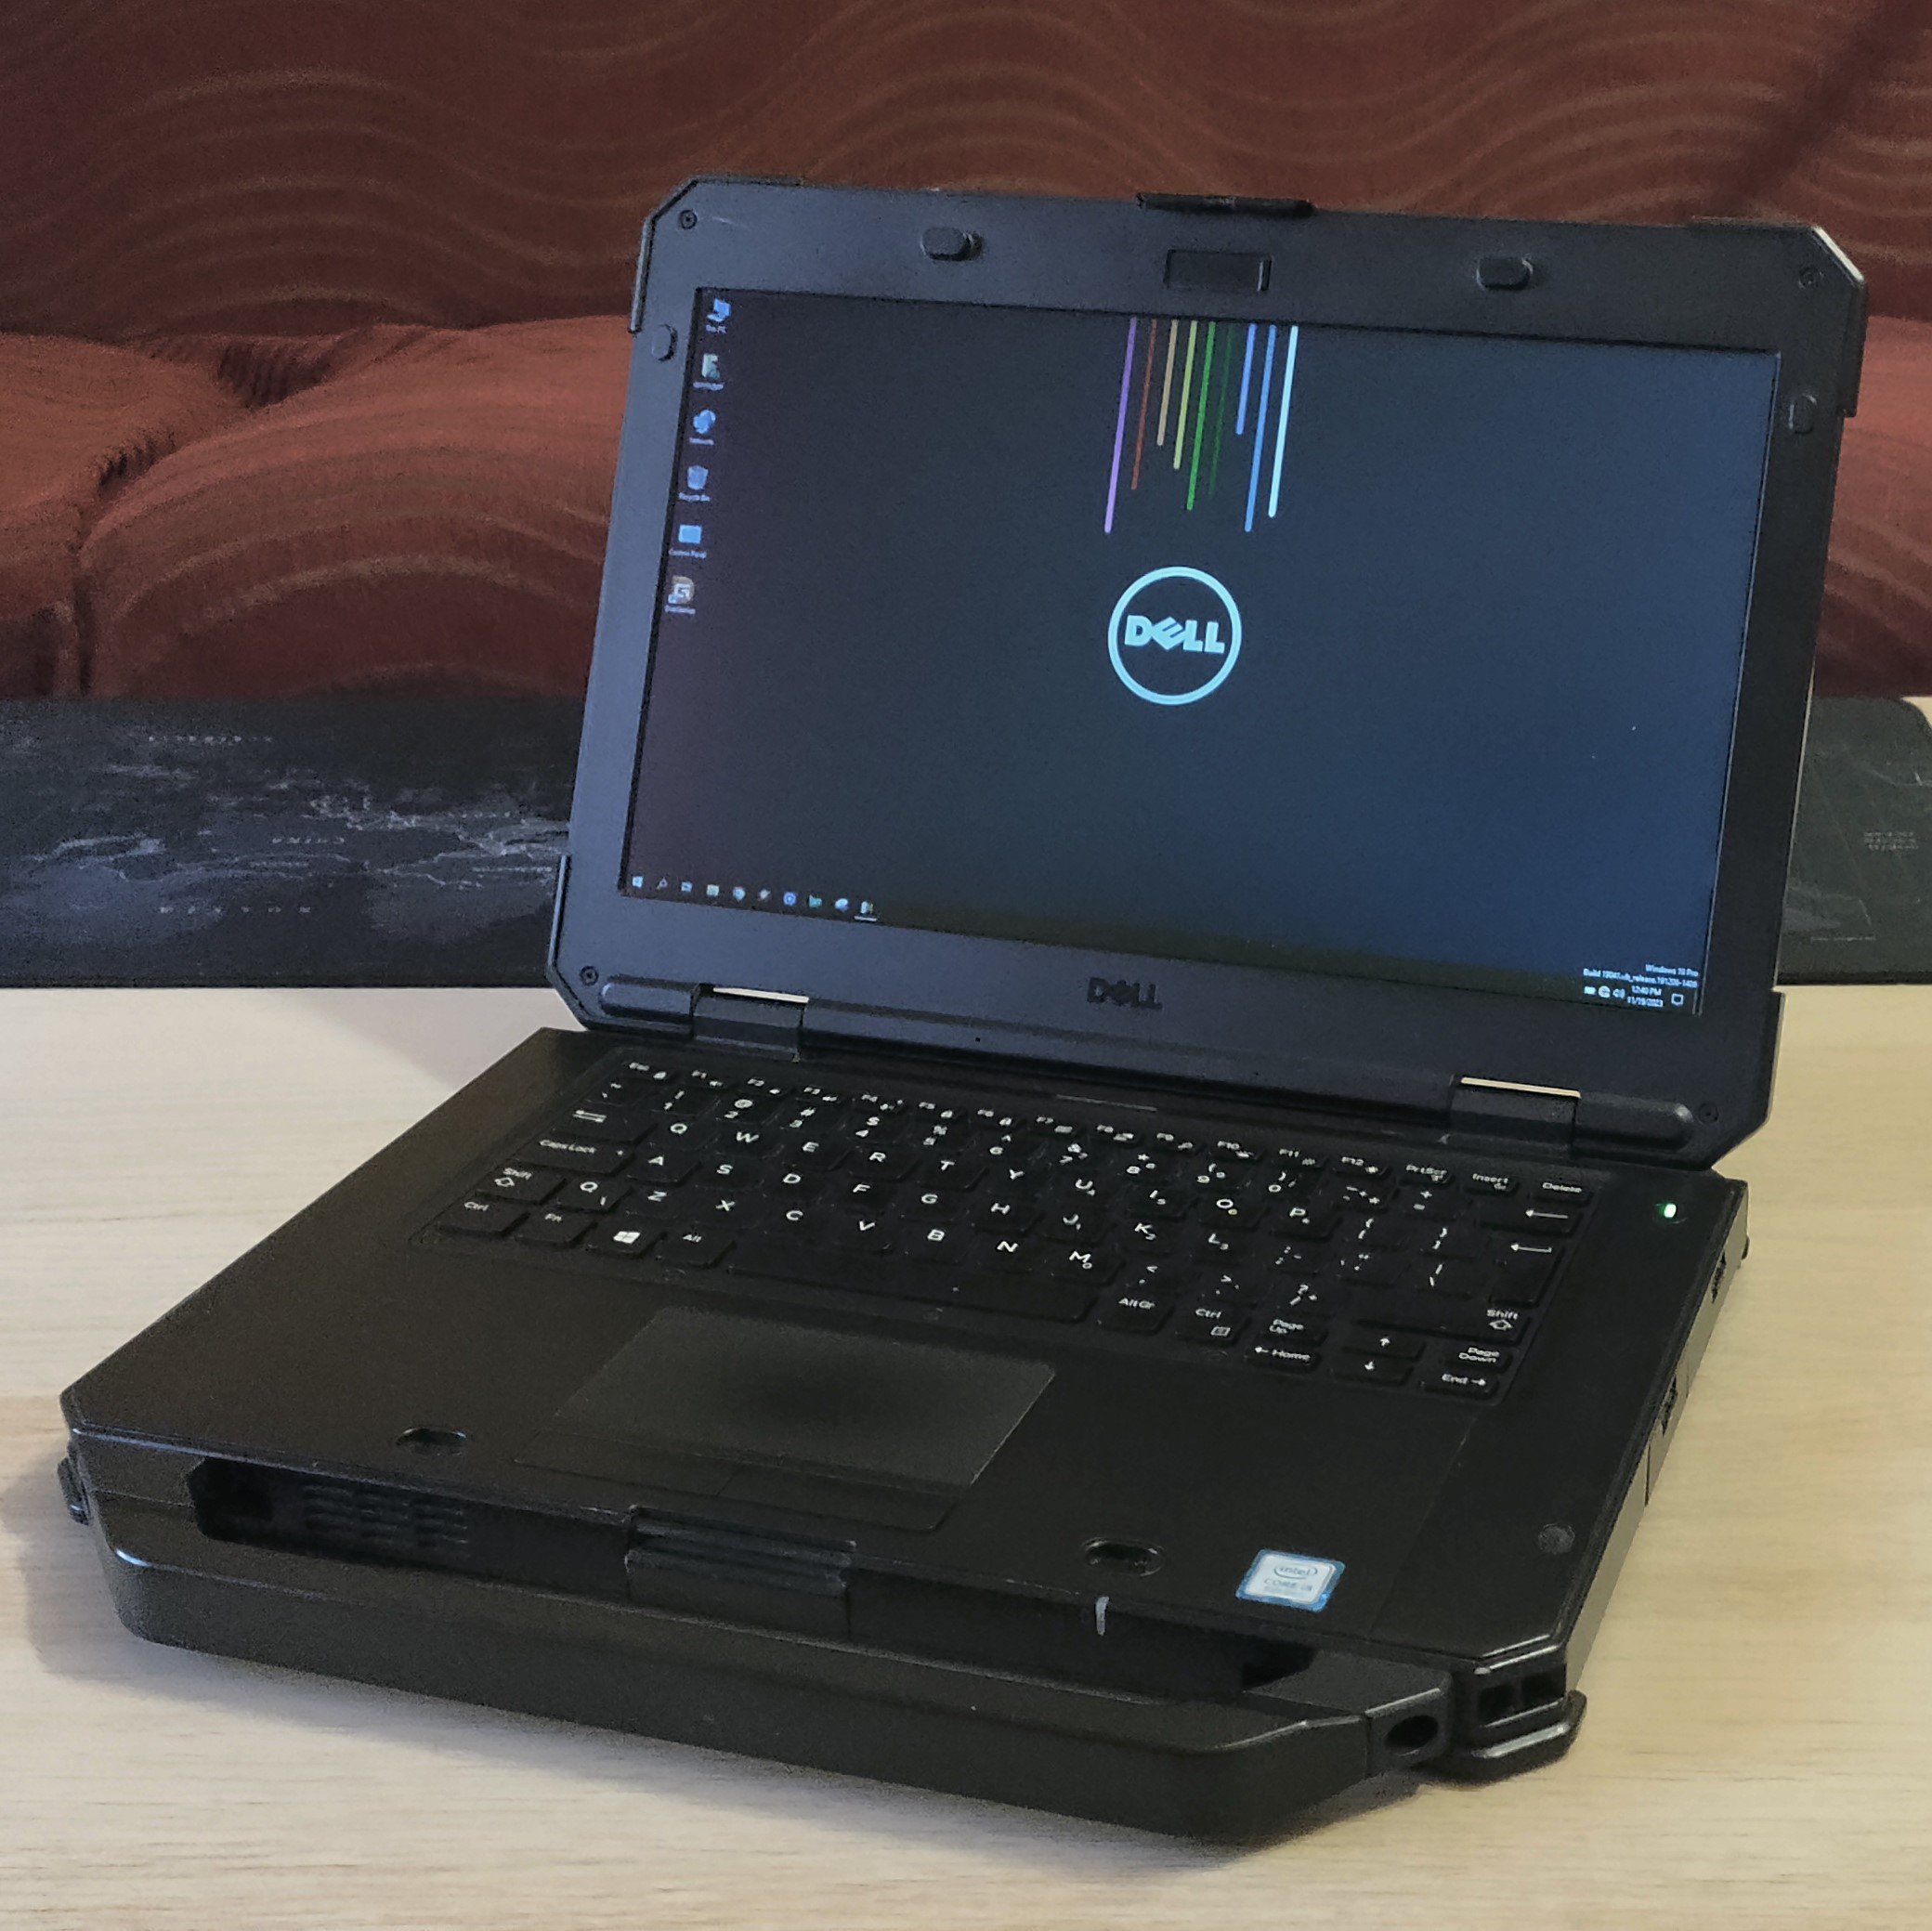 More information about "DELL Latitude 5420 Rugged"